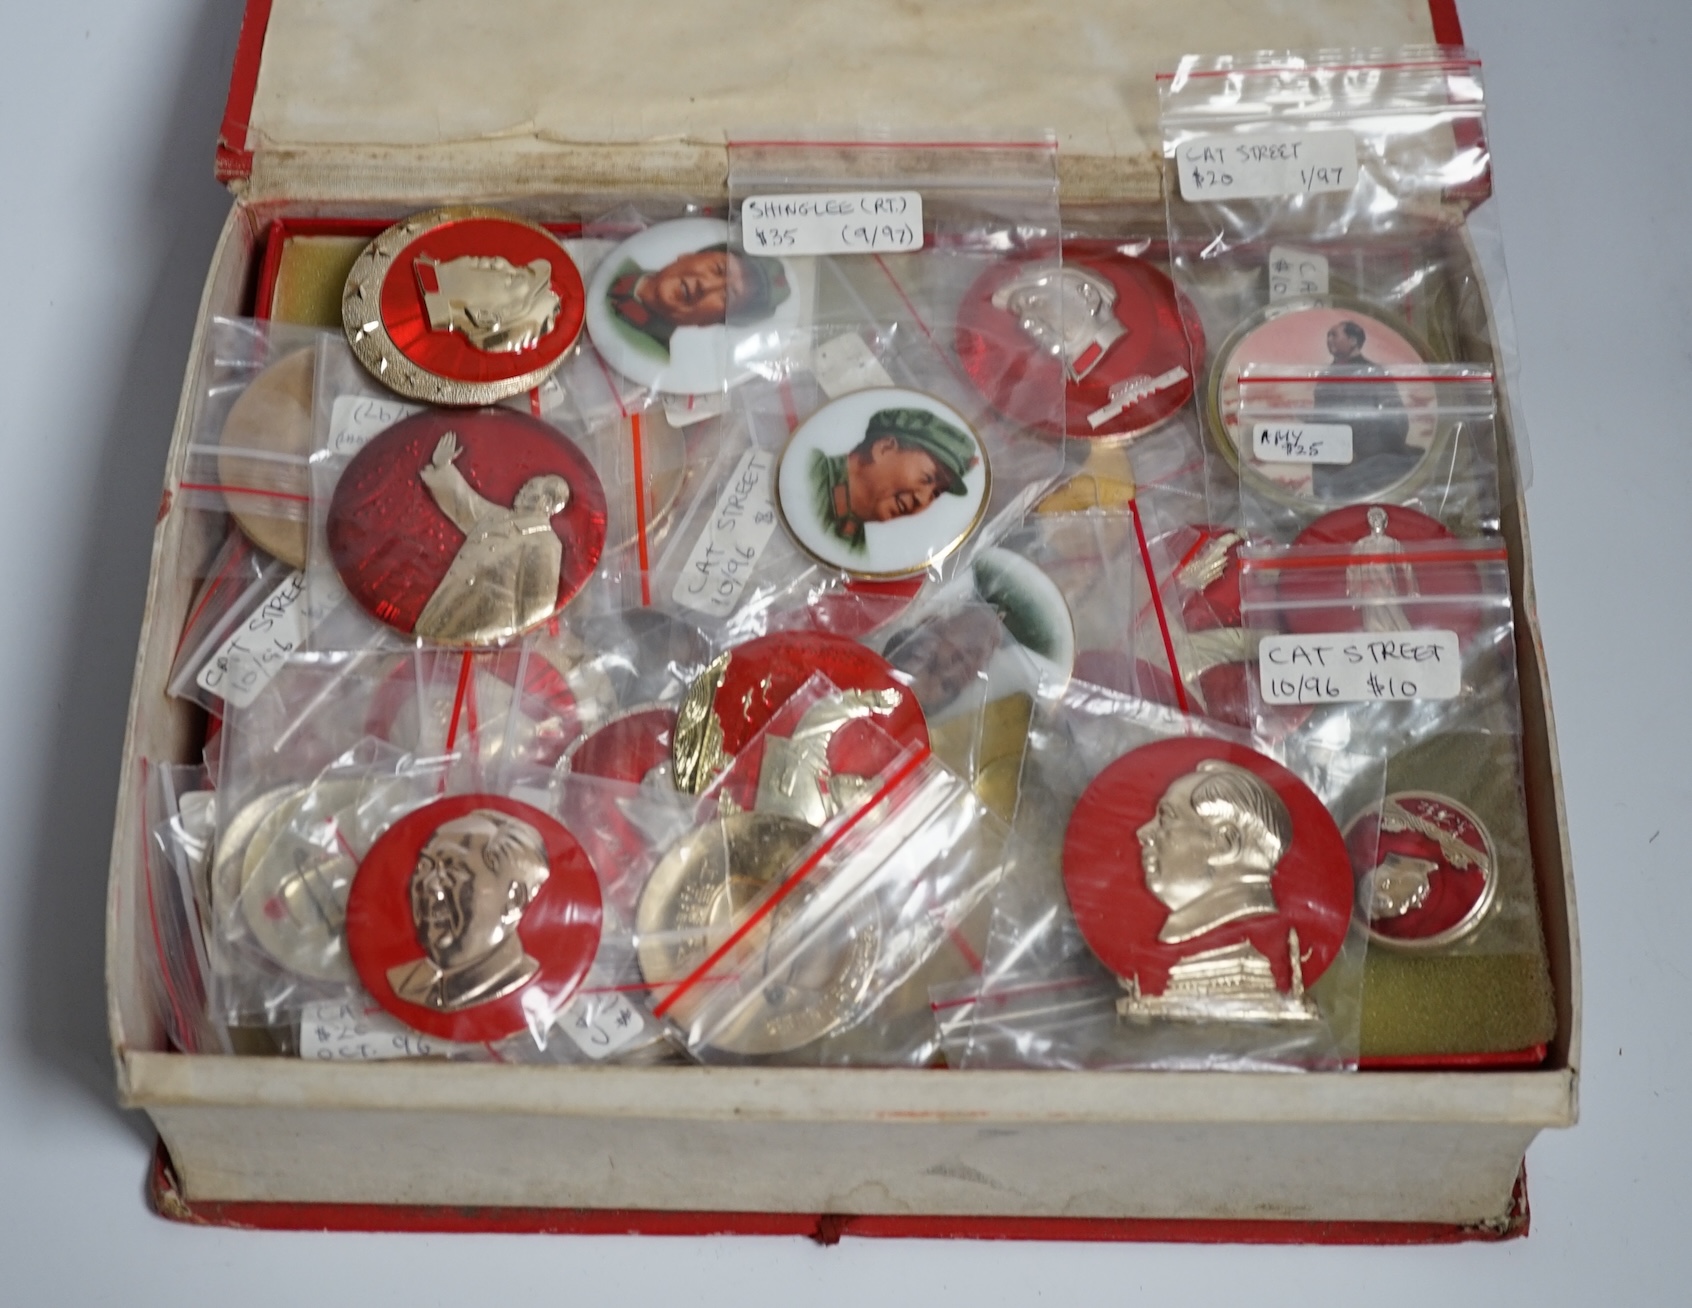 A collection of forty one Chinese Mao Zedong badges and a box                                                                                                                                                               